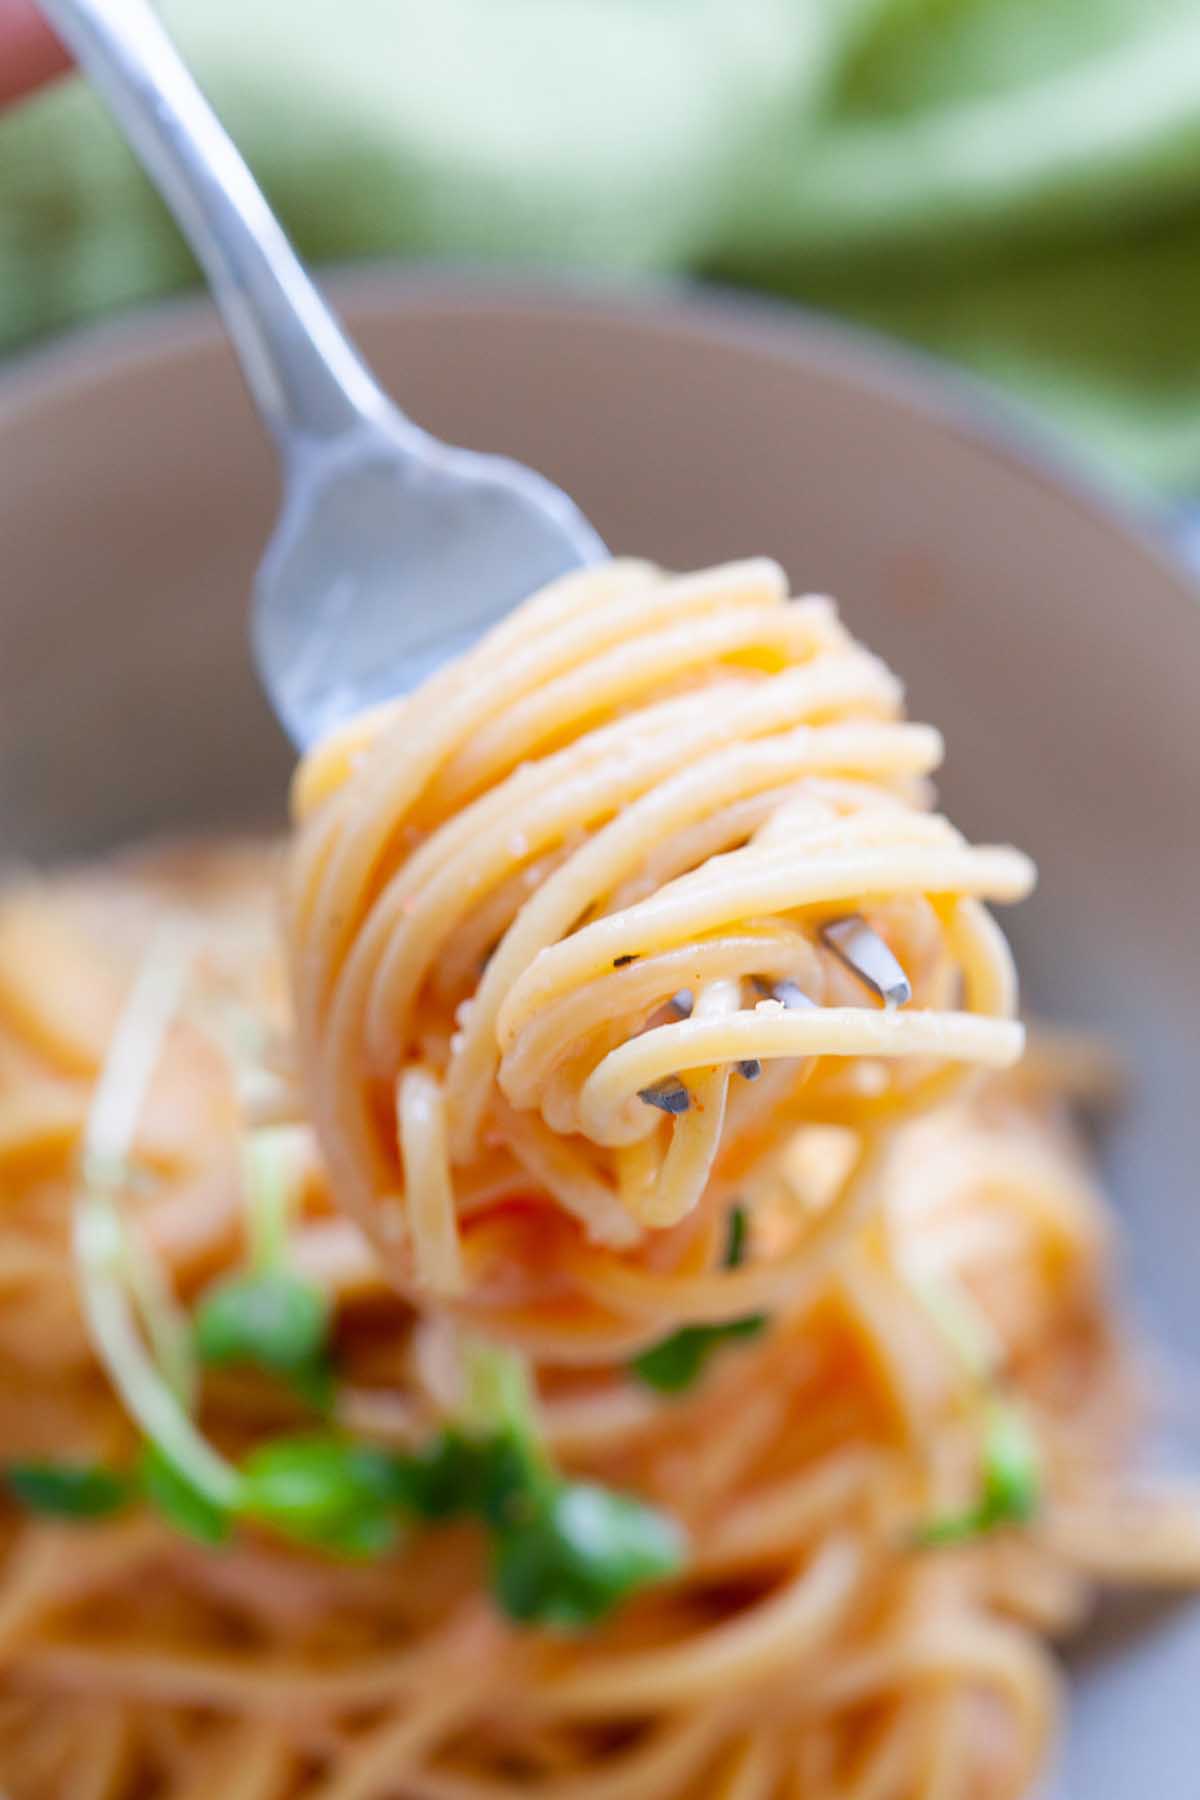 Mentaiko pasta swirled around a fork presented in an appetizing way, highlighting the savory and rich flavors of this Japanese-inspired delight.